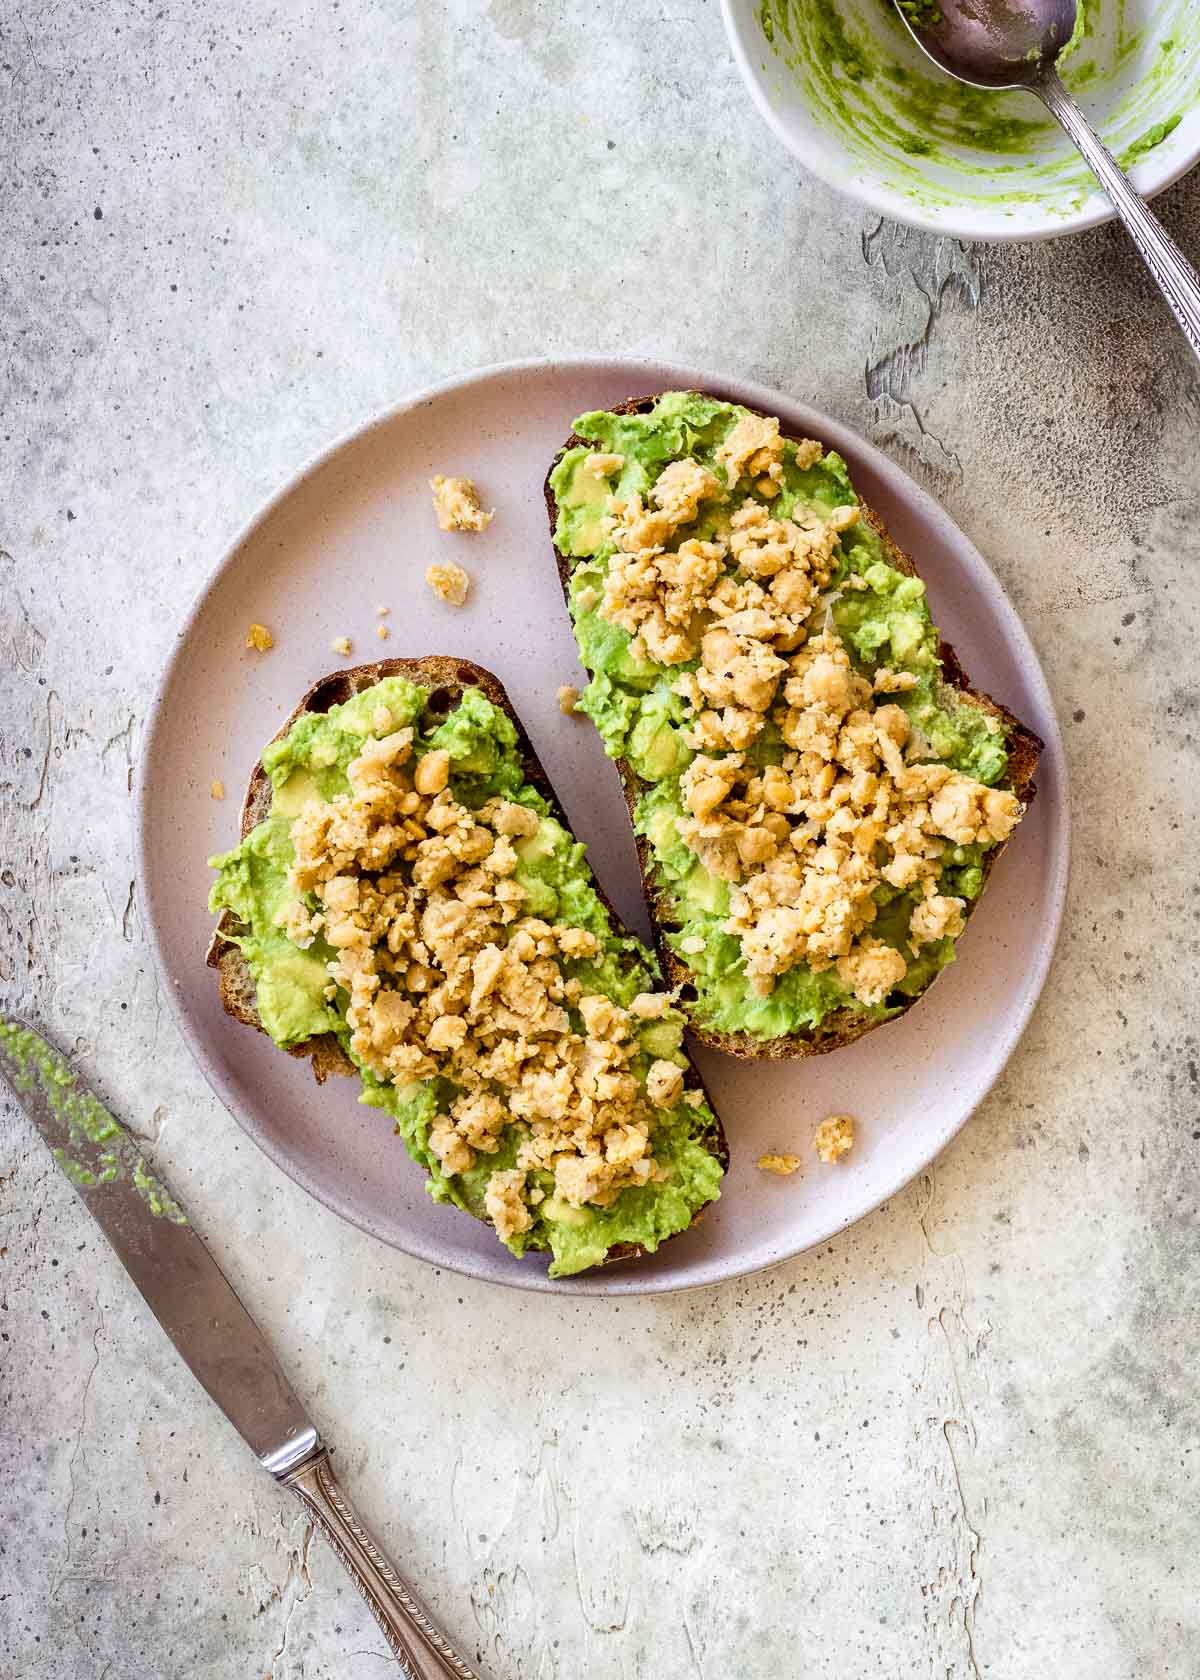 High protein vegan avocado toast with chickpeas on a pink plate.